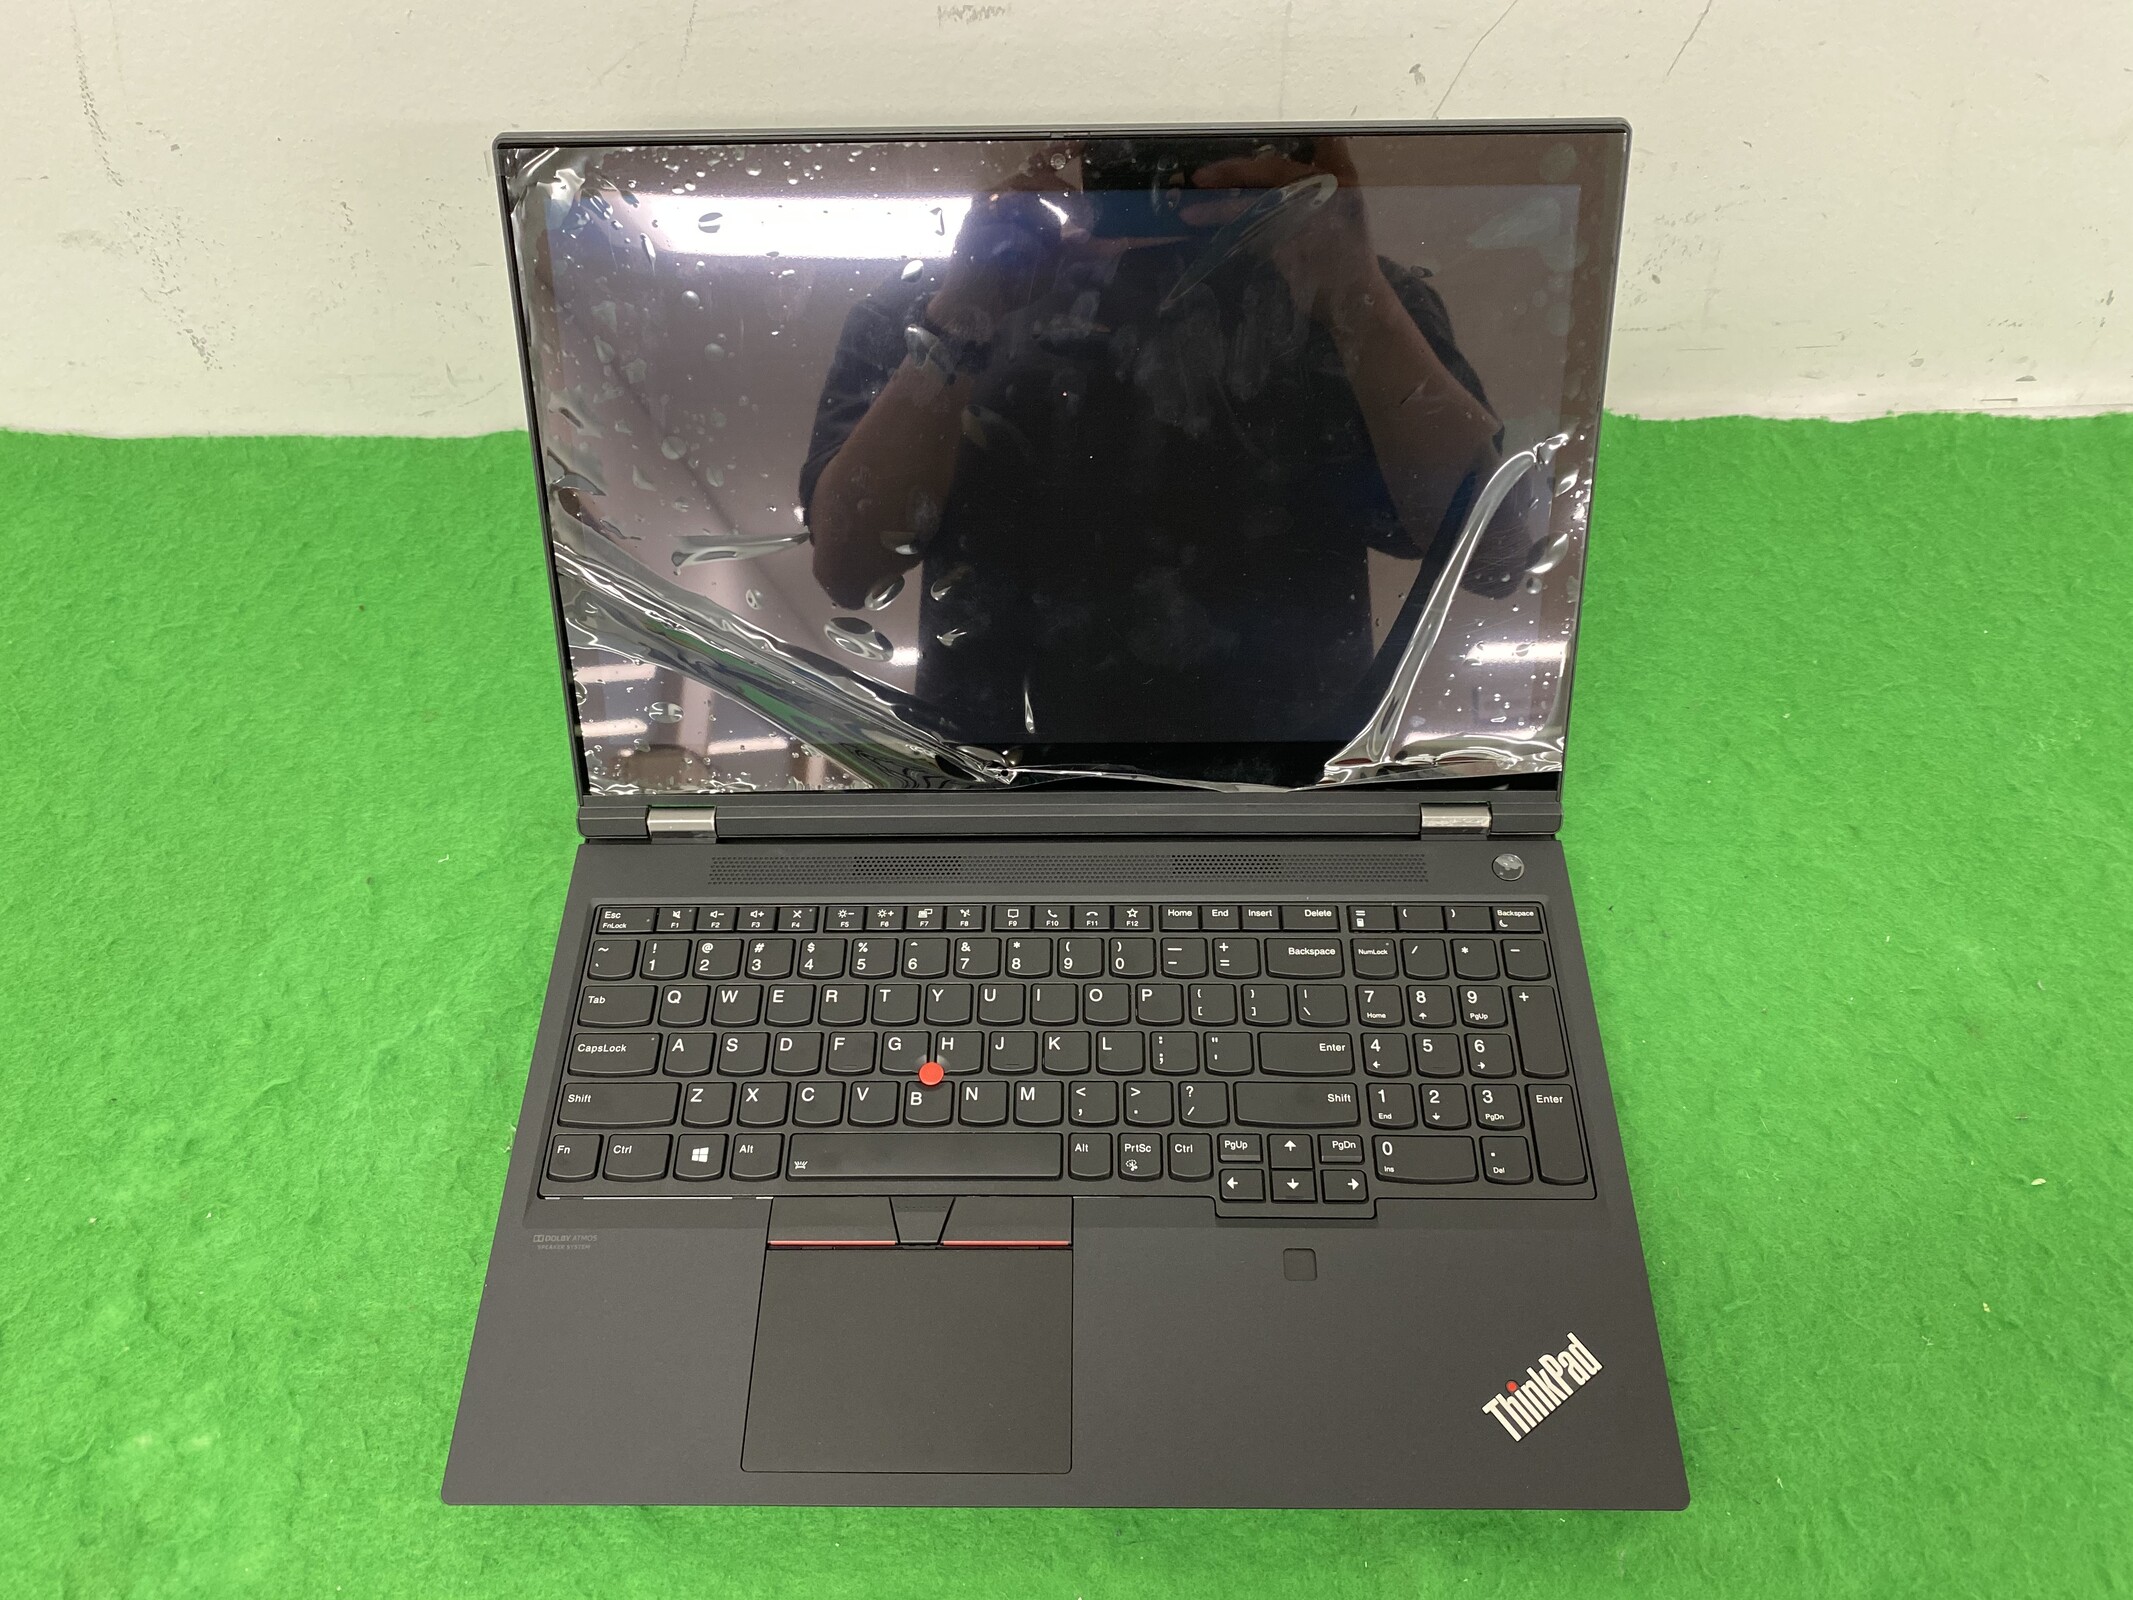 ThinkPad T15g: Is Lenovo preparing a gaming ThinkPad with the GeForce RTX 2080 Super Max-Q? NotebookCheck.net News